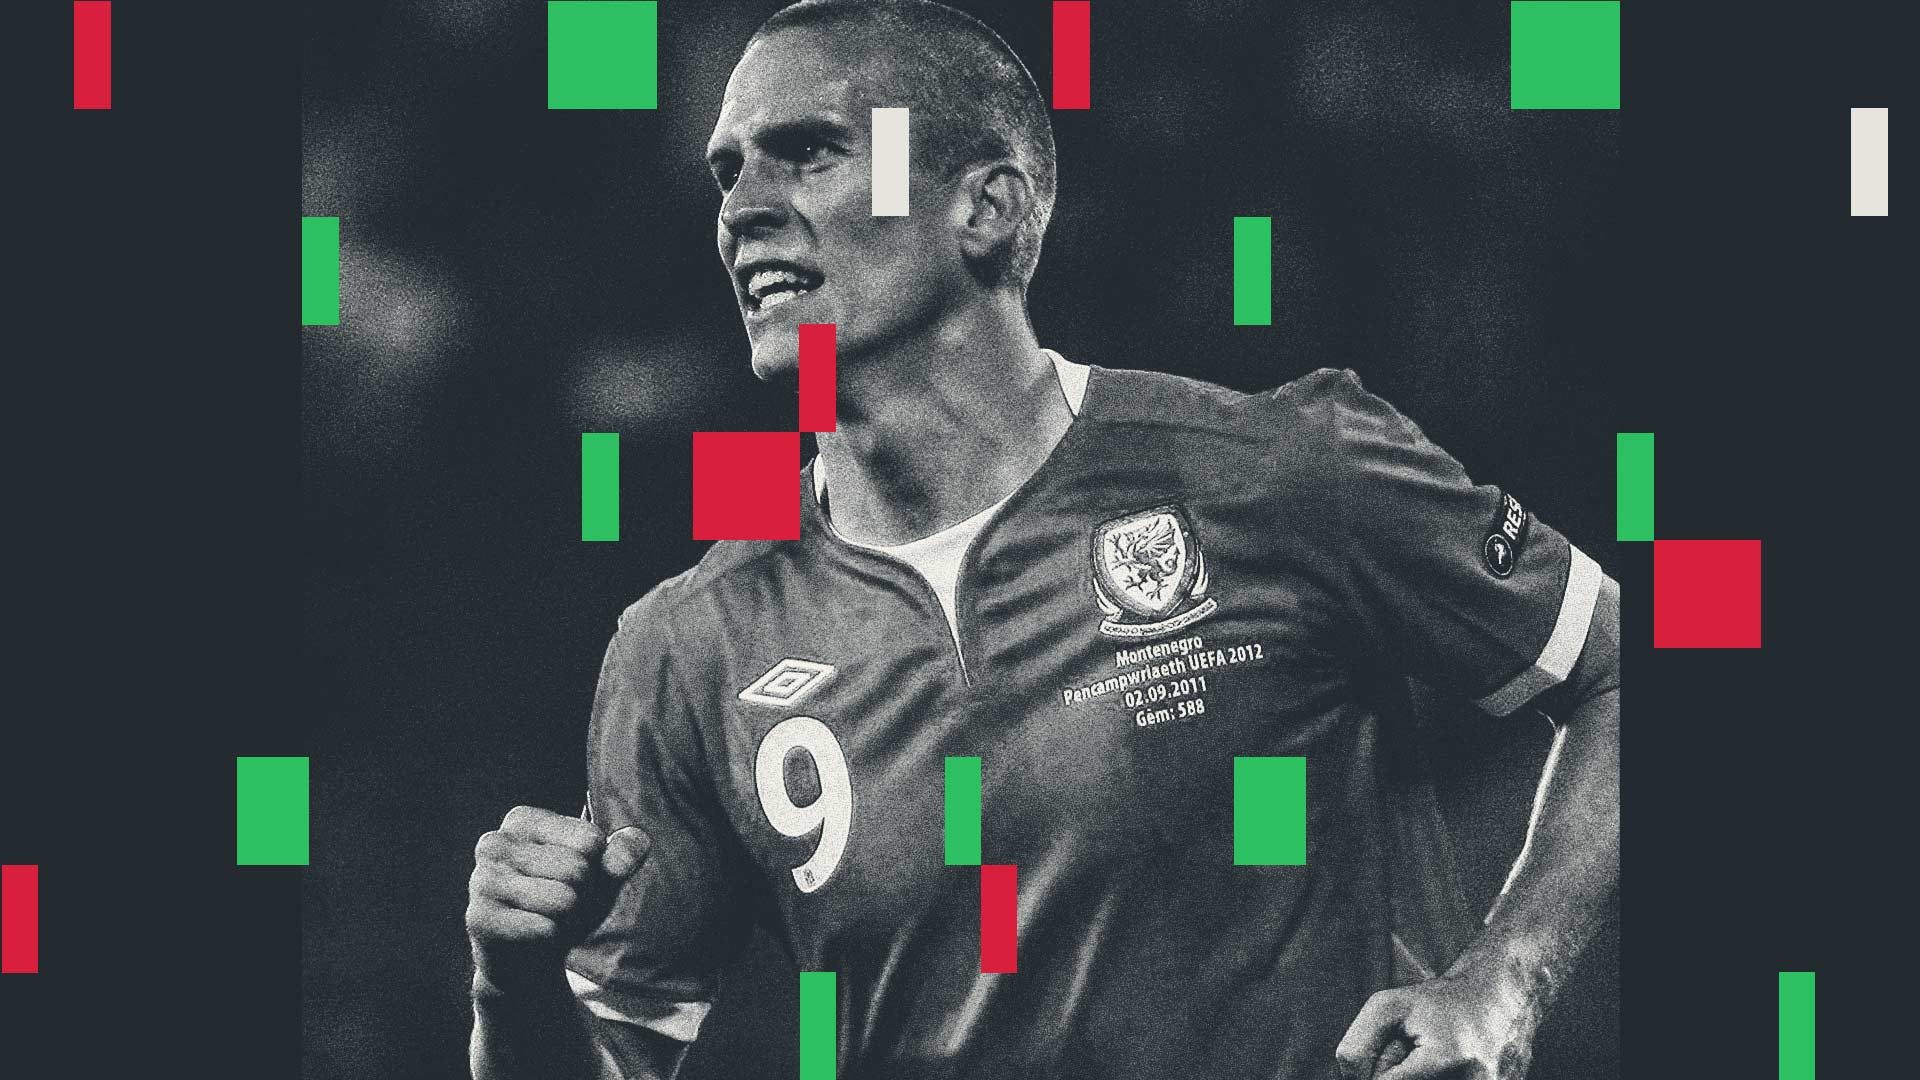 Steve Morison playing for Wales during a particularly fallow period of the national team. I can't tell if it's a black and white photo or he's just drained the life out of the atmosphere around him